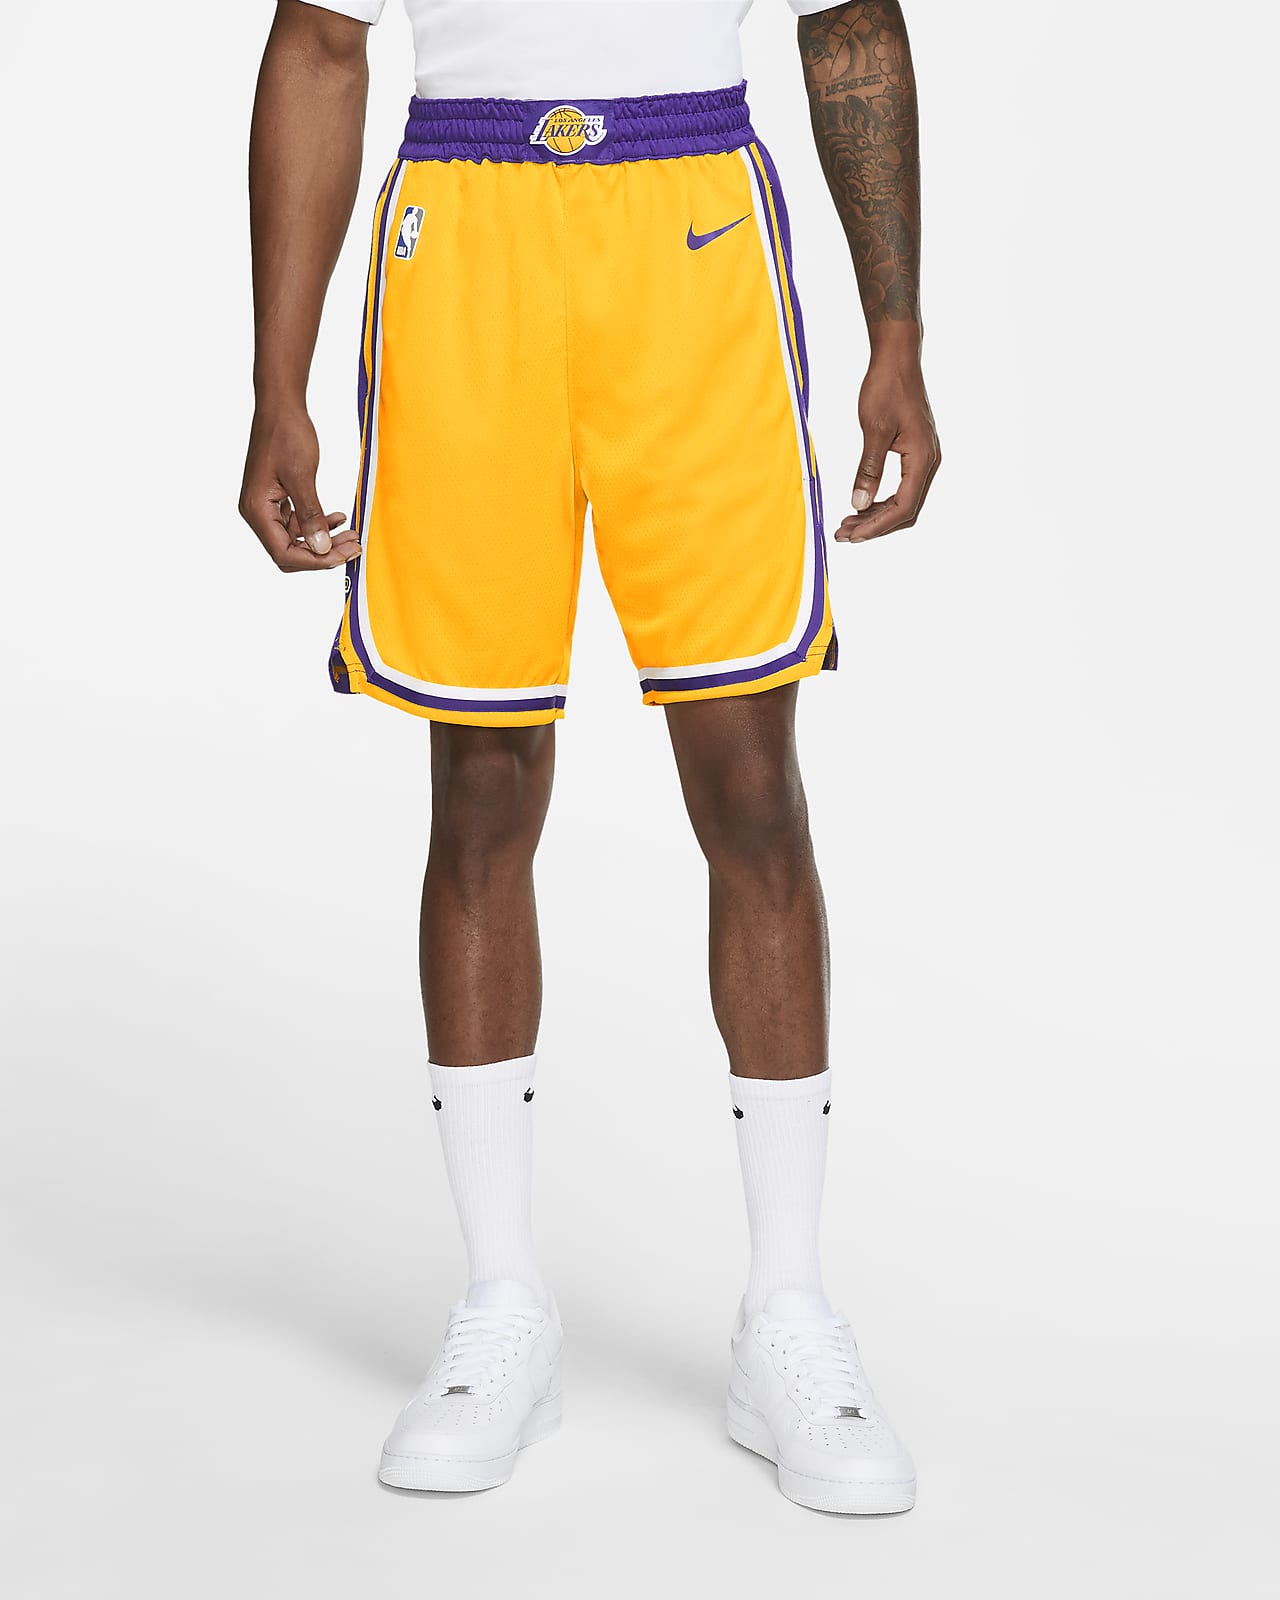 Los Angeles Lakers Icon Edition Nike 